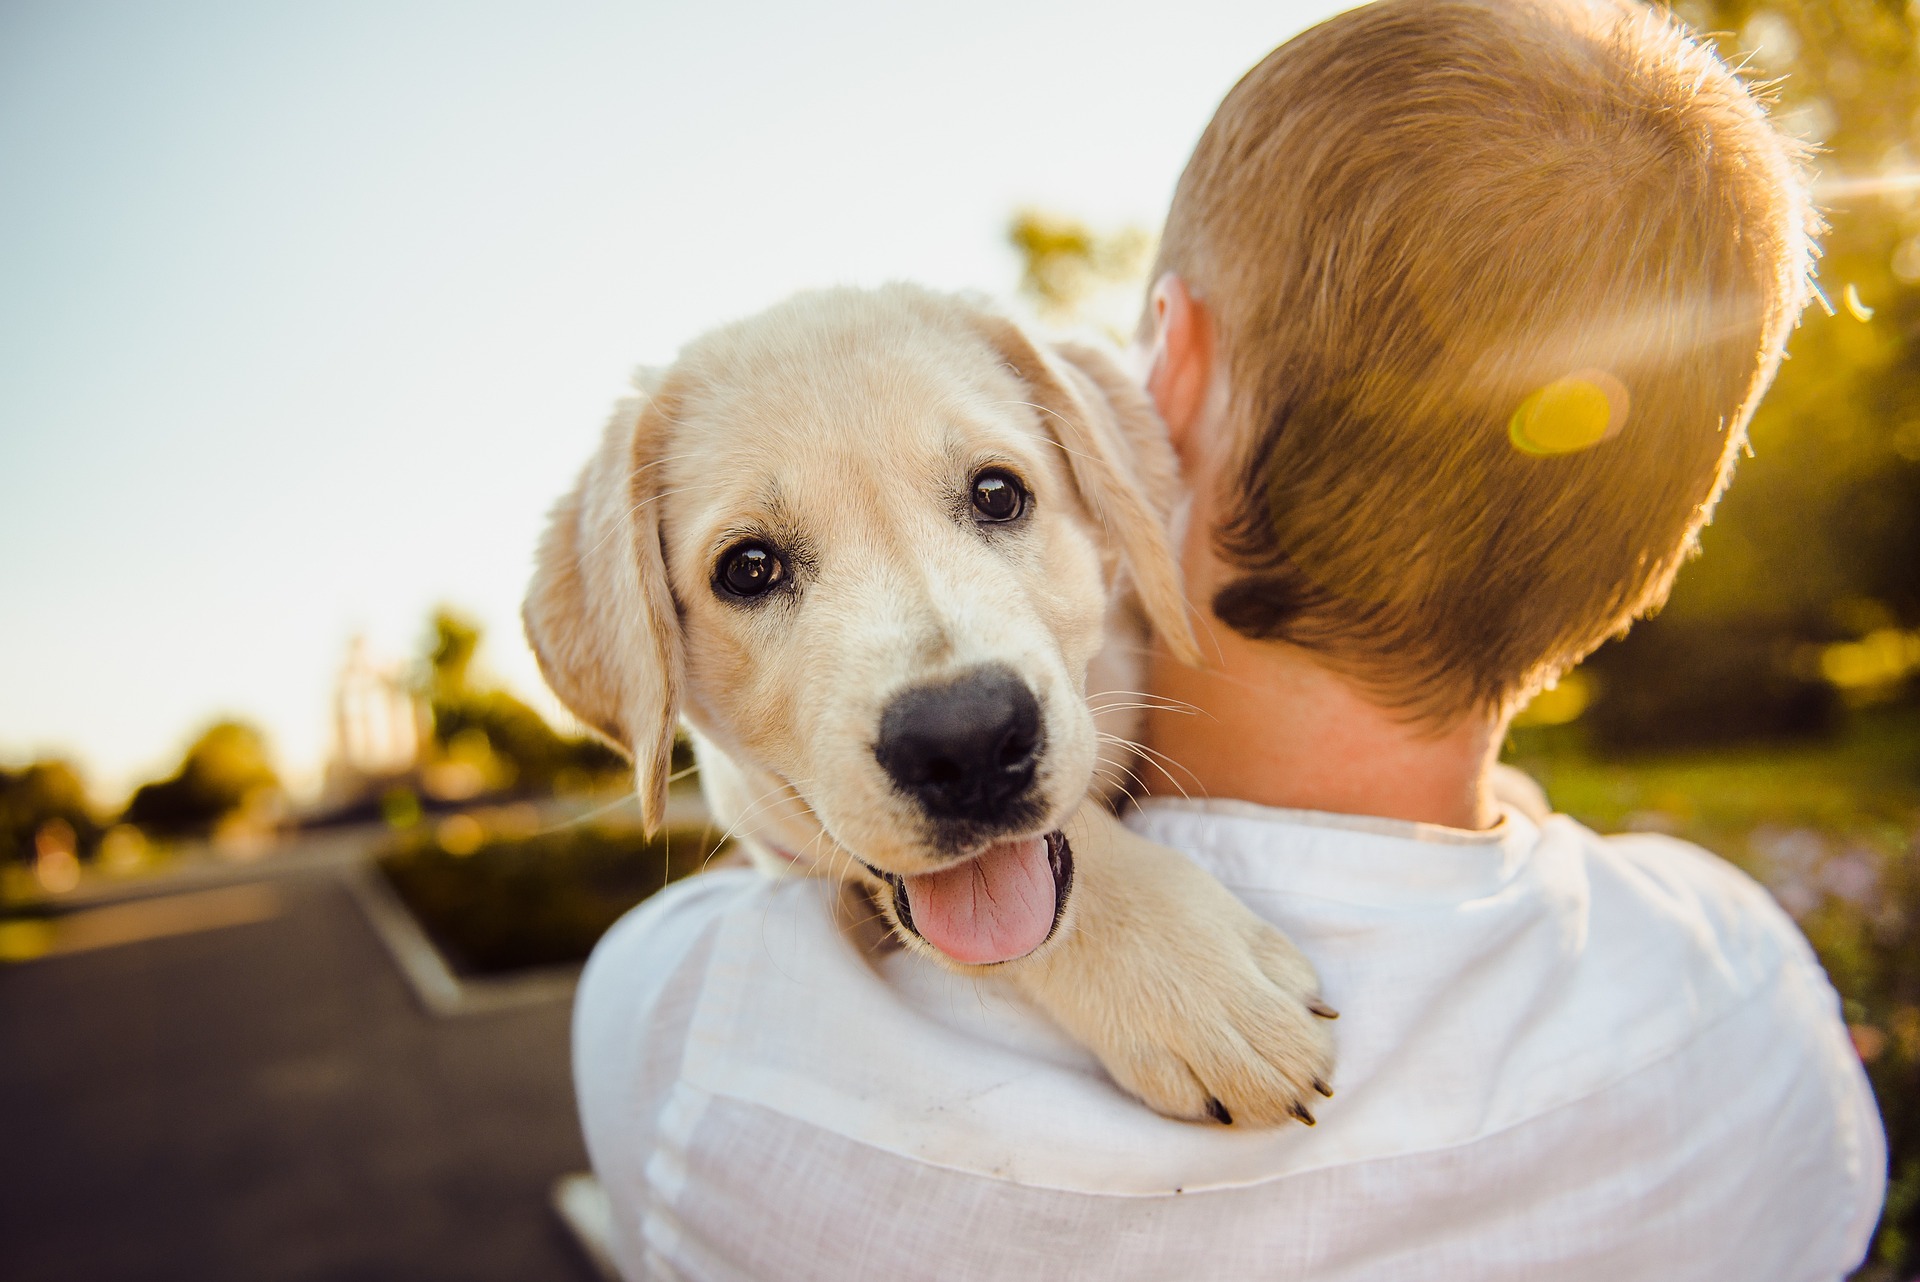 Ensuring every sunset is pain-free. Learn how to care for your pet's dental health with our comprehensive guide to fractured teeth treatment